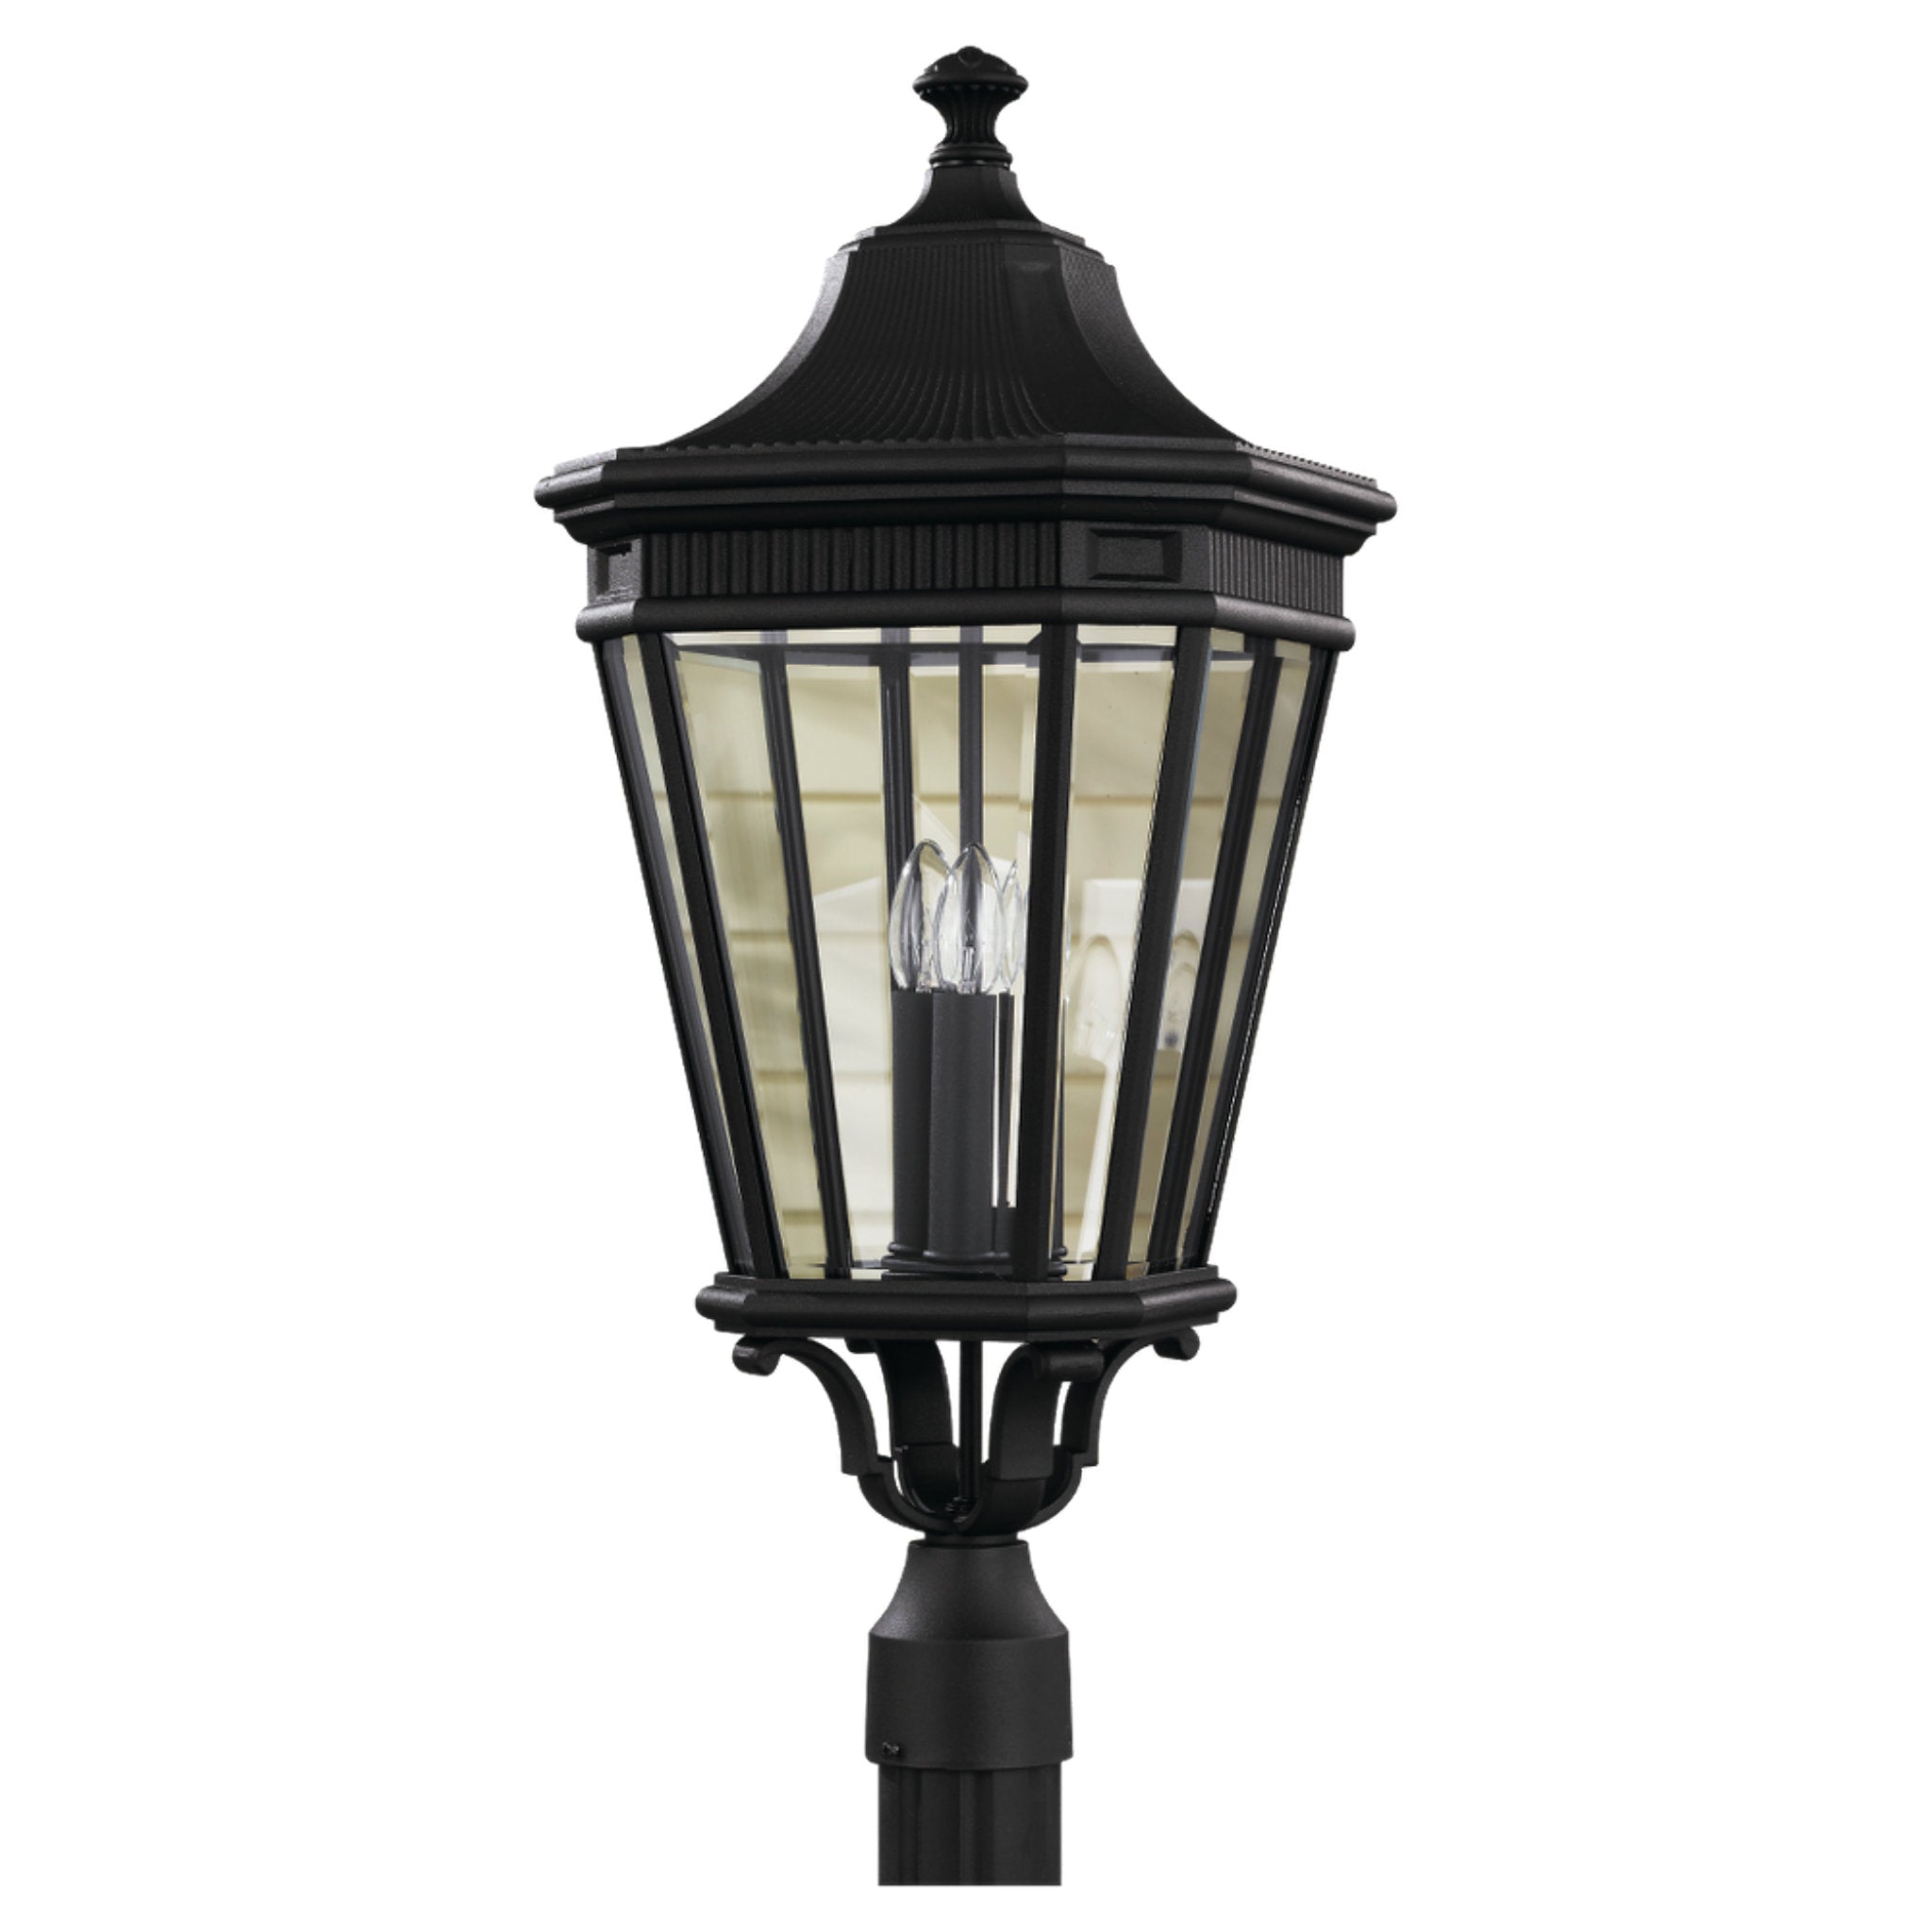 Cotswold Lane Large Post Lantern Traditional Outdoor Fixture 12" Width 27.5" Height Aluminum Irregular Clear Beveled Shade in Black